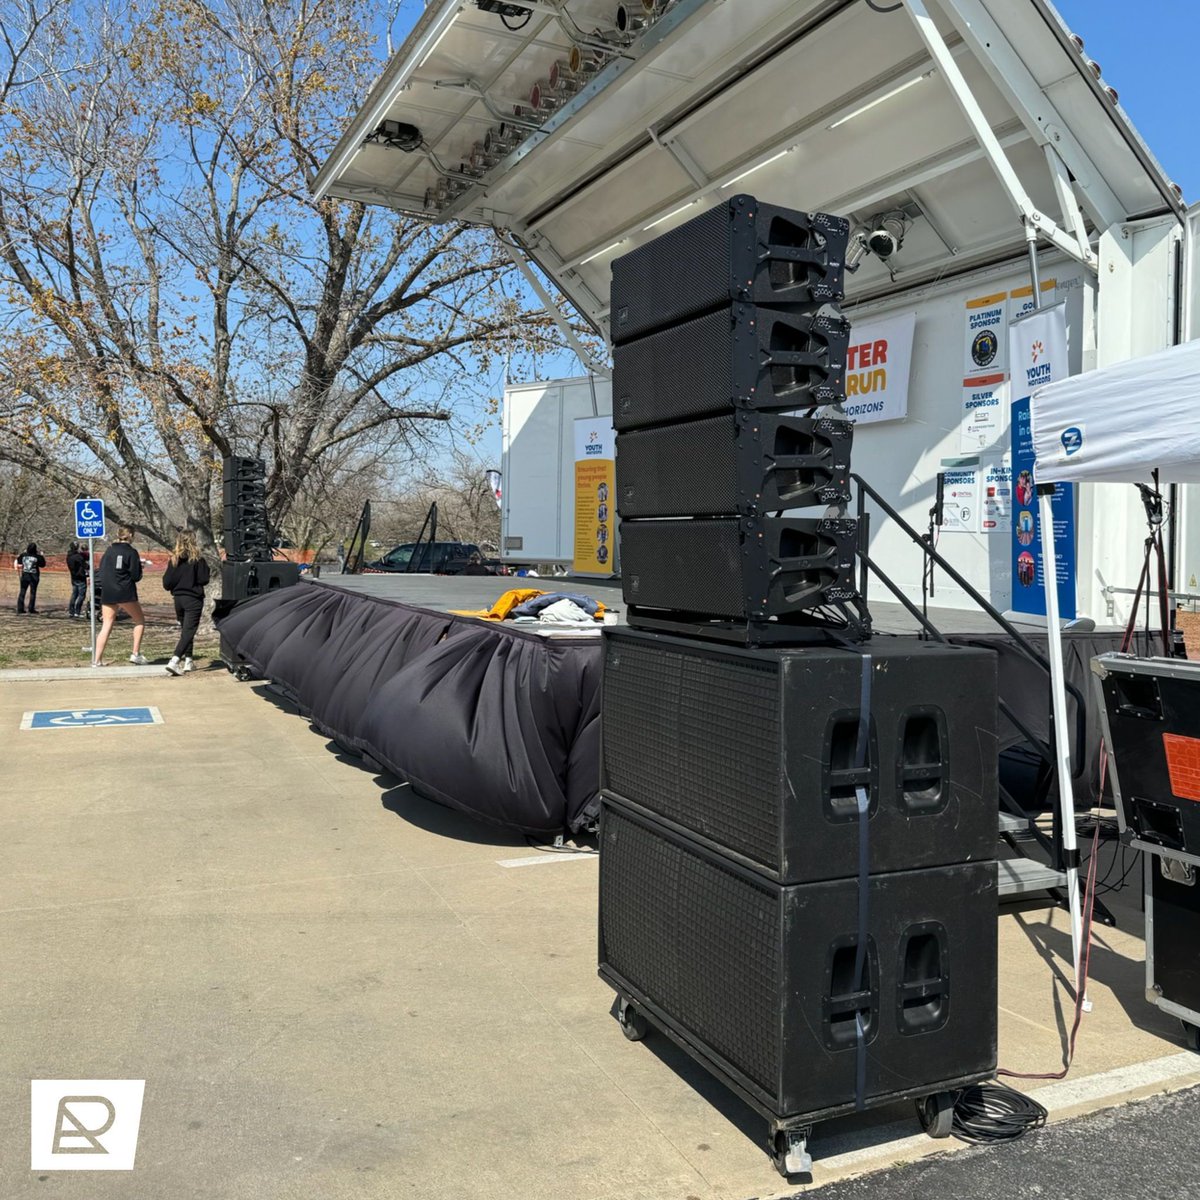 Each year we are blessed to be a part of the East Sun Run with @YouthHorizons.

So thankful for our relationship with you all, and looking forward to next year! 
.
.
.
#RelevantAV #ExperiencesThatMove #AudioVisual #lifeofasoundengineer #livesoundengineer #livesound